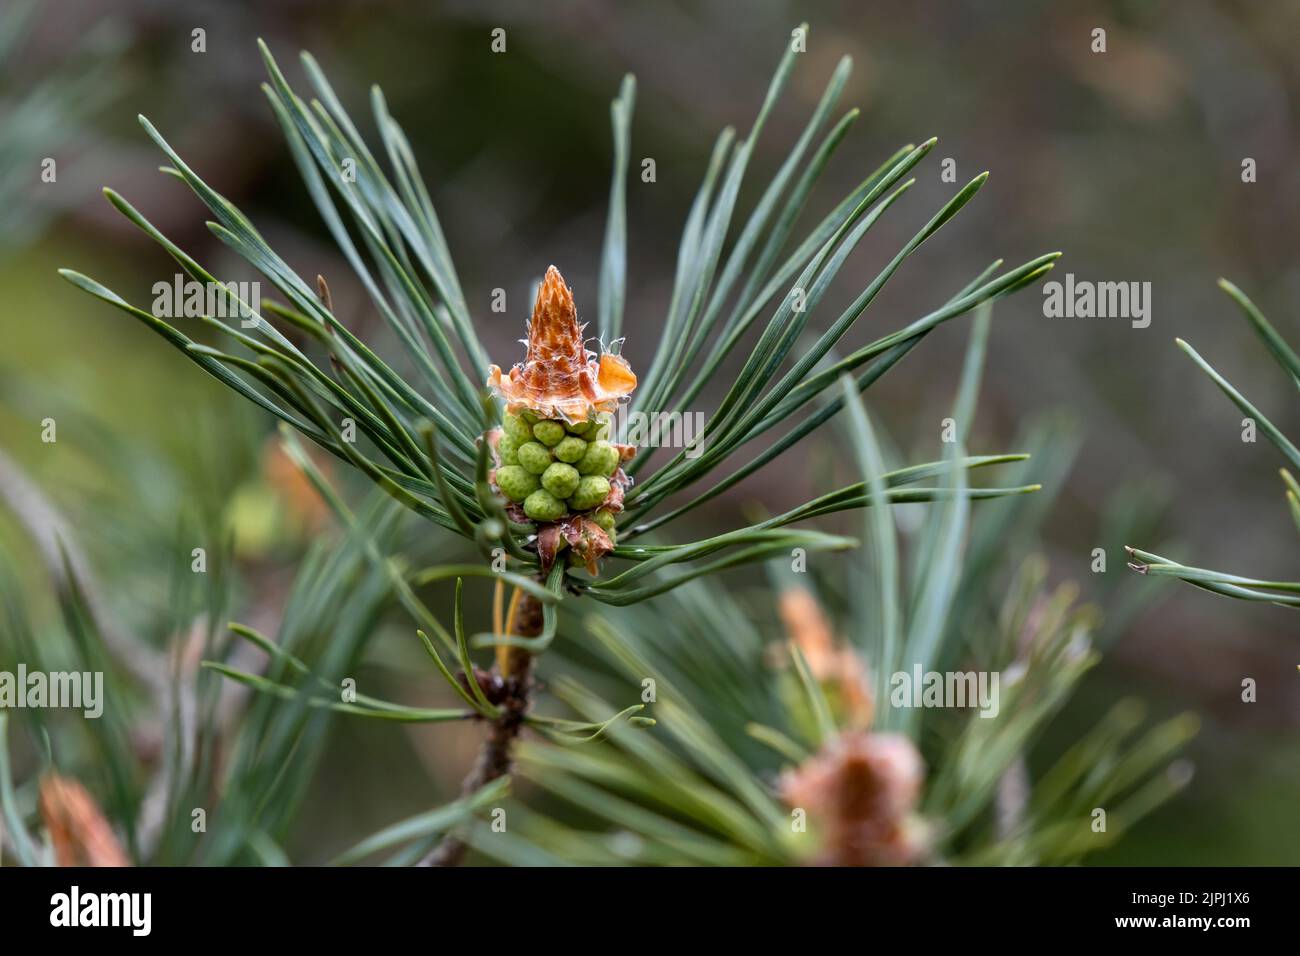 Scots pine (Pinus sylvestris) young seed cone and green leaves Stock Photo